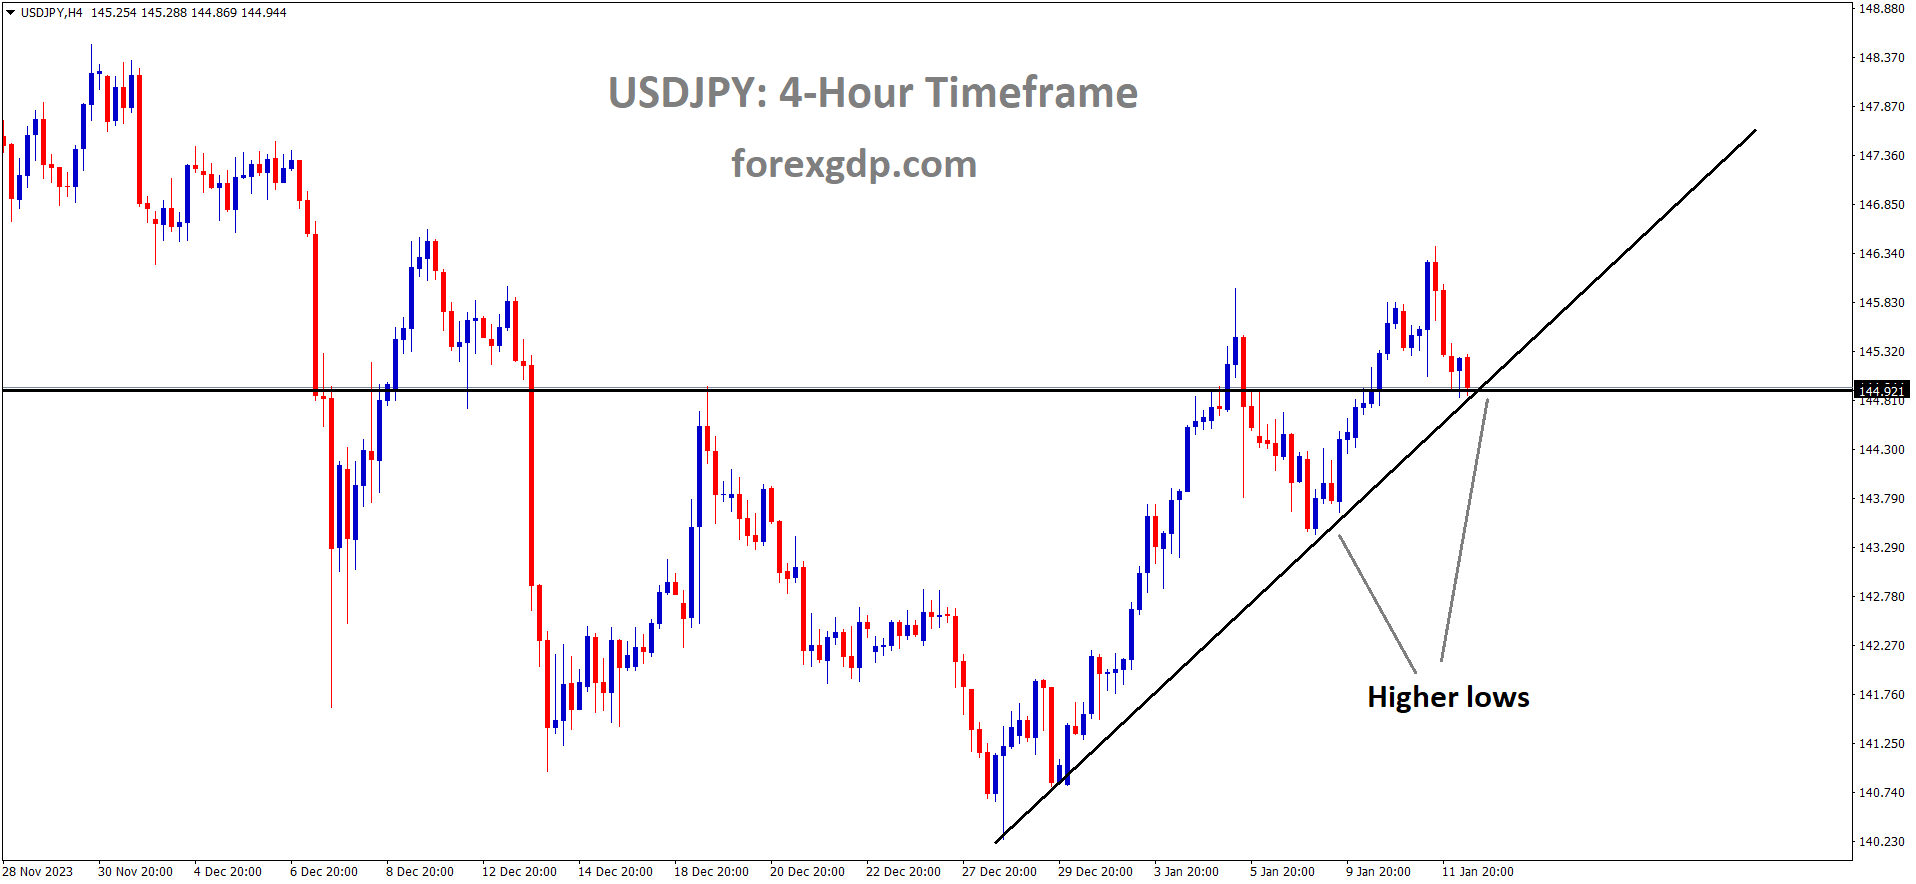 USDJPY is moving in the Up trend line and the market has reached the higher low area of the trend line